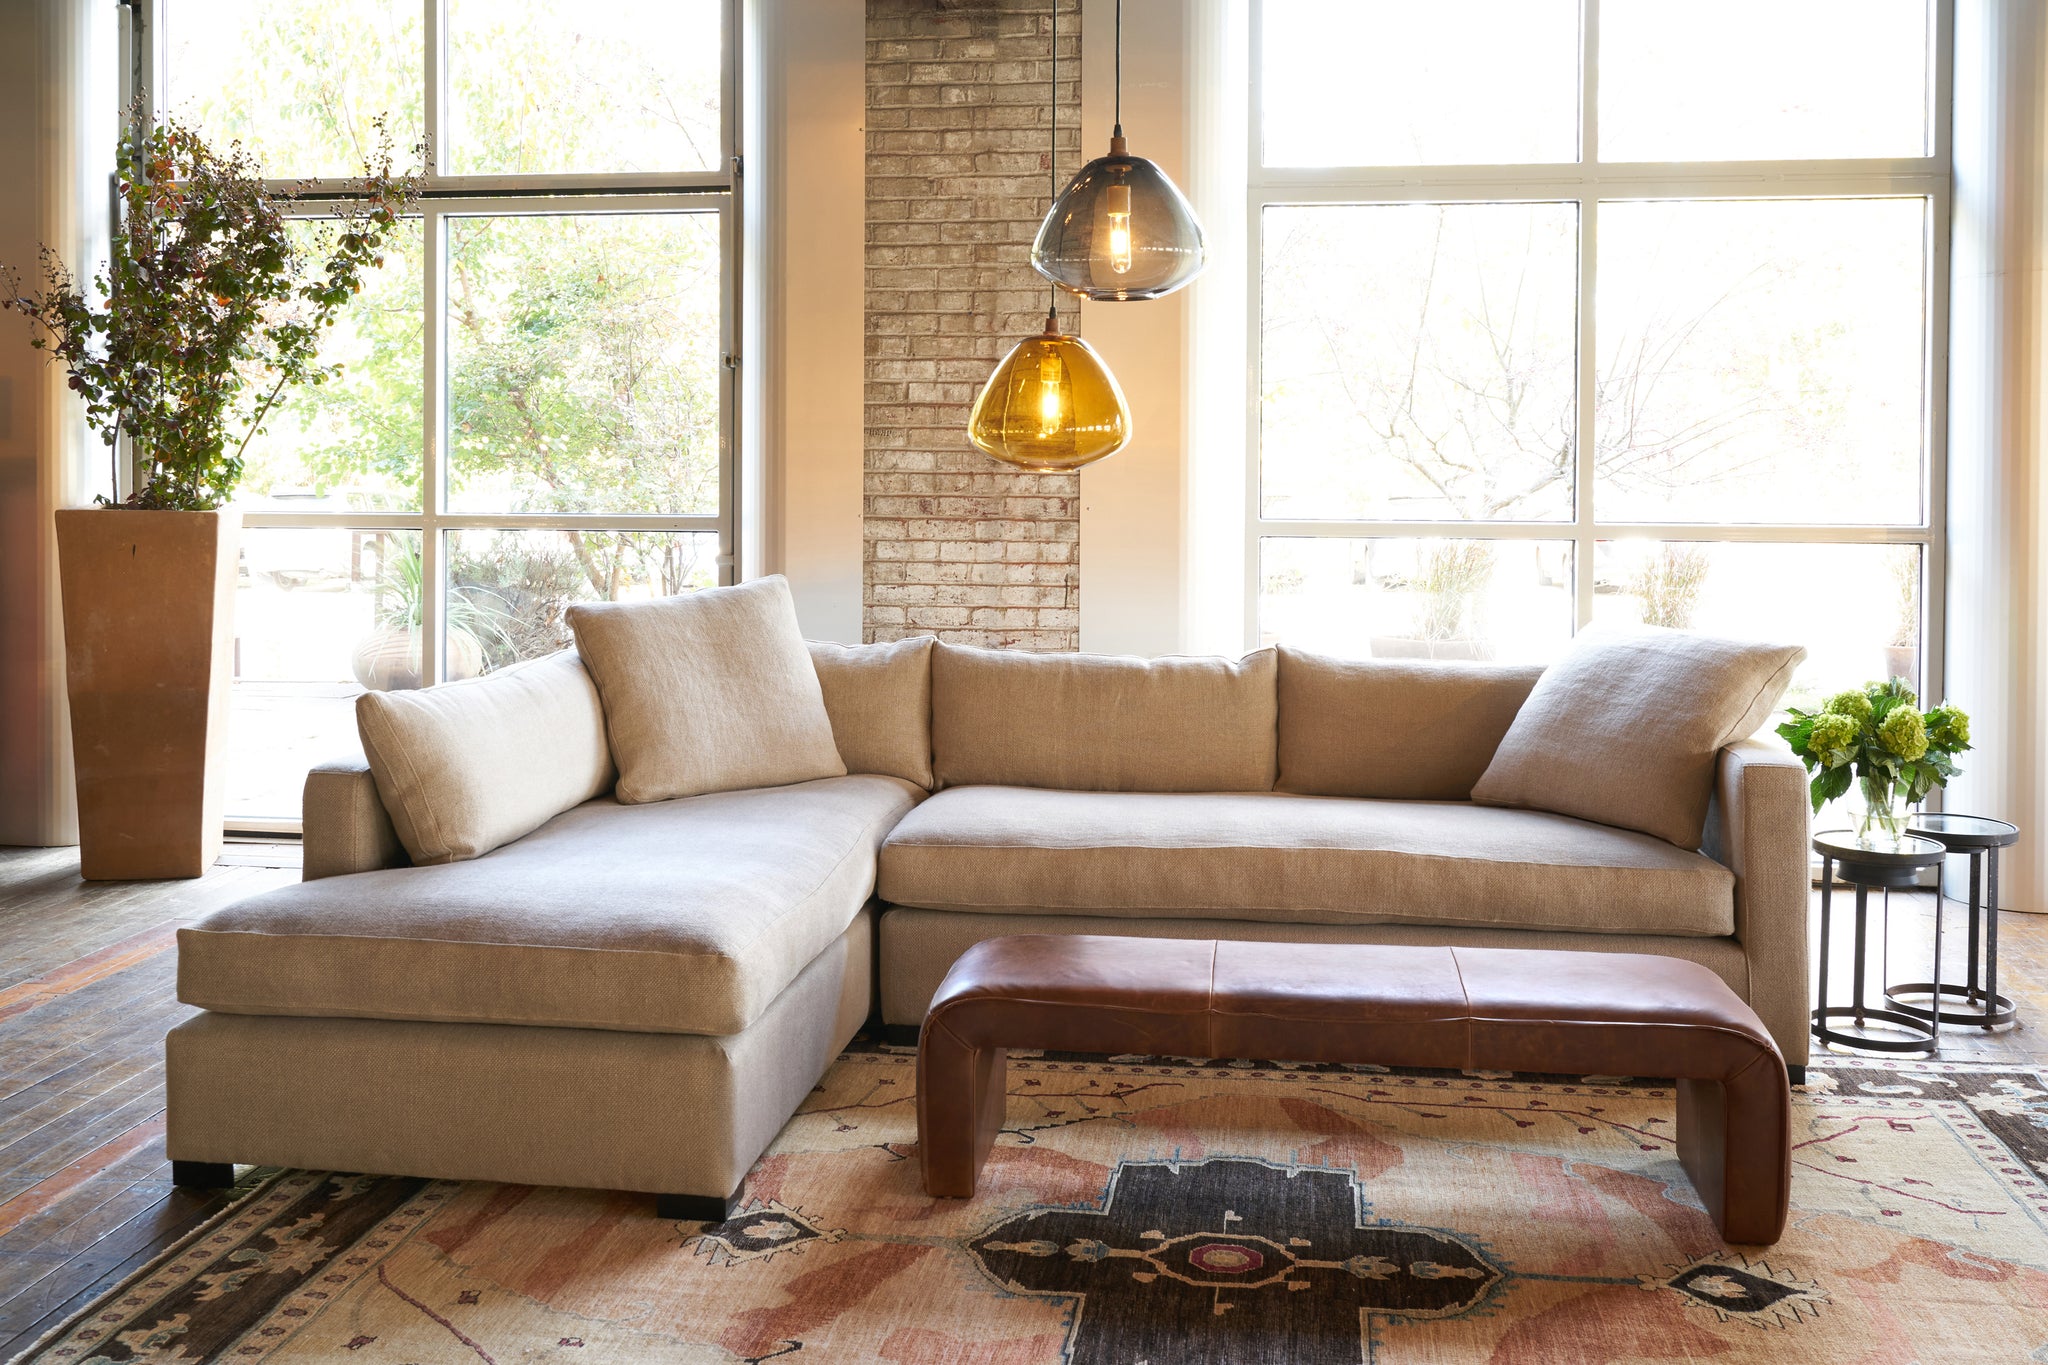  Sectional in front of large windows with 2 glass pendant and a leather bench. Photographed in Lan Oatmeal. 